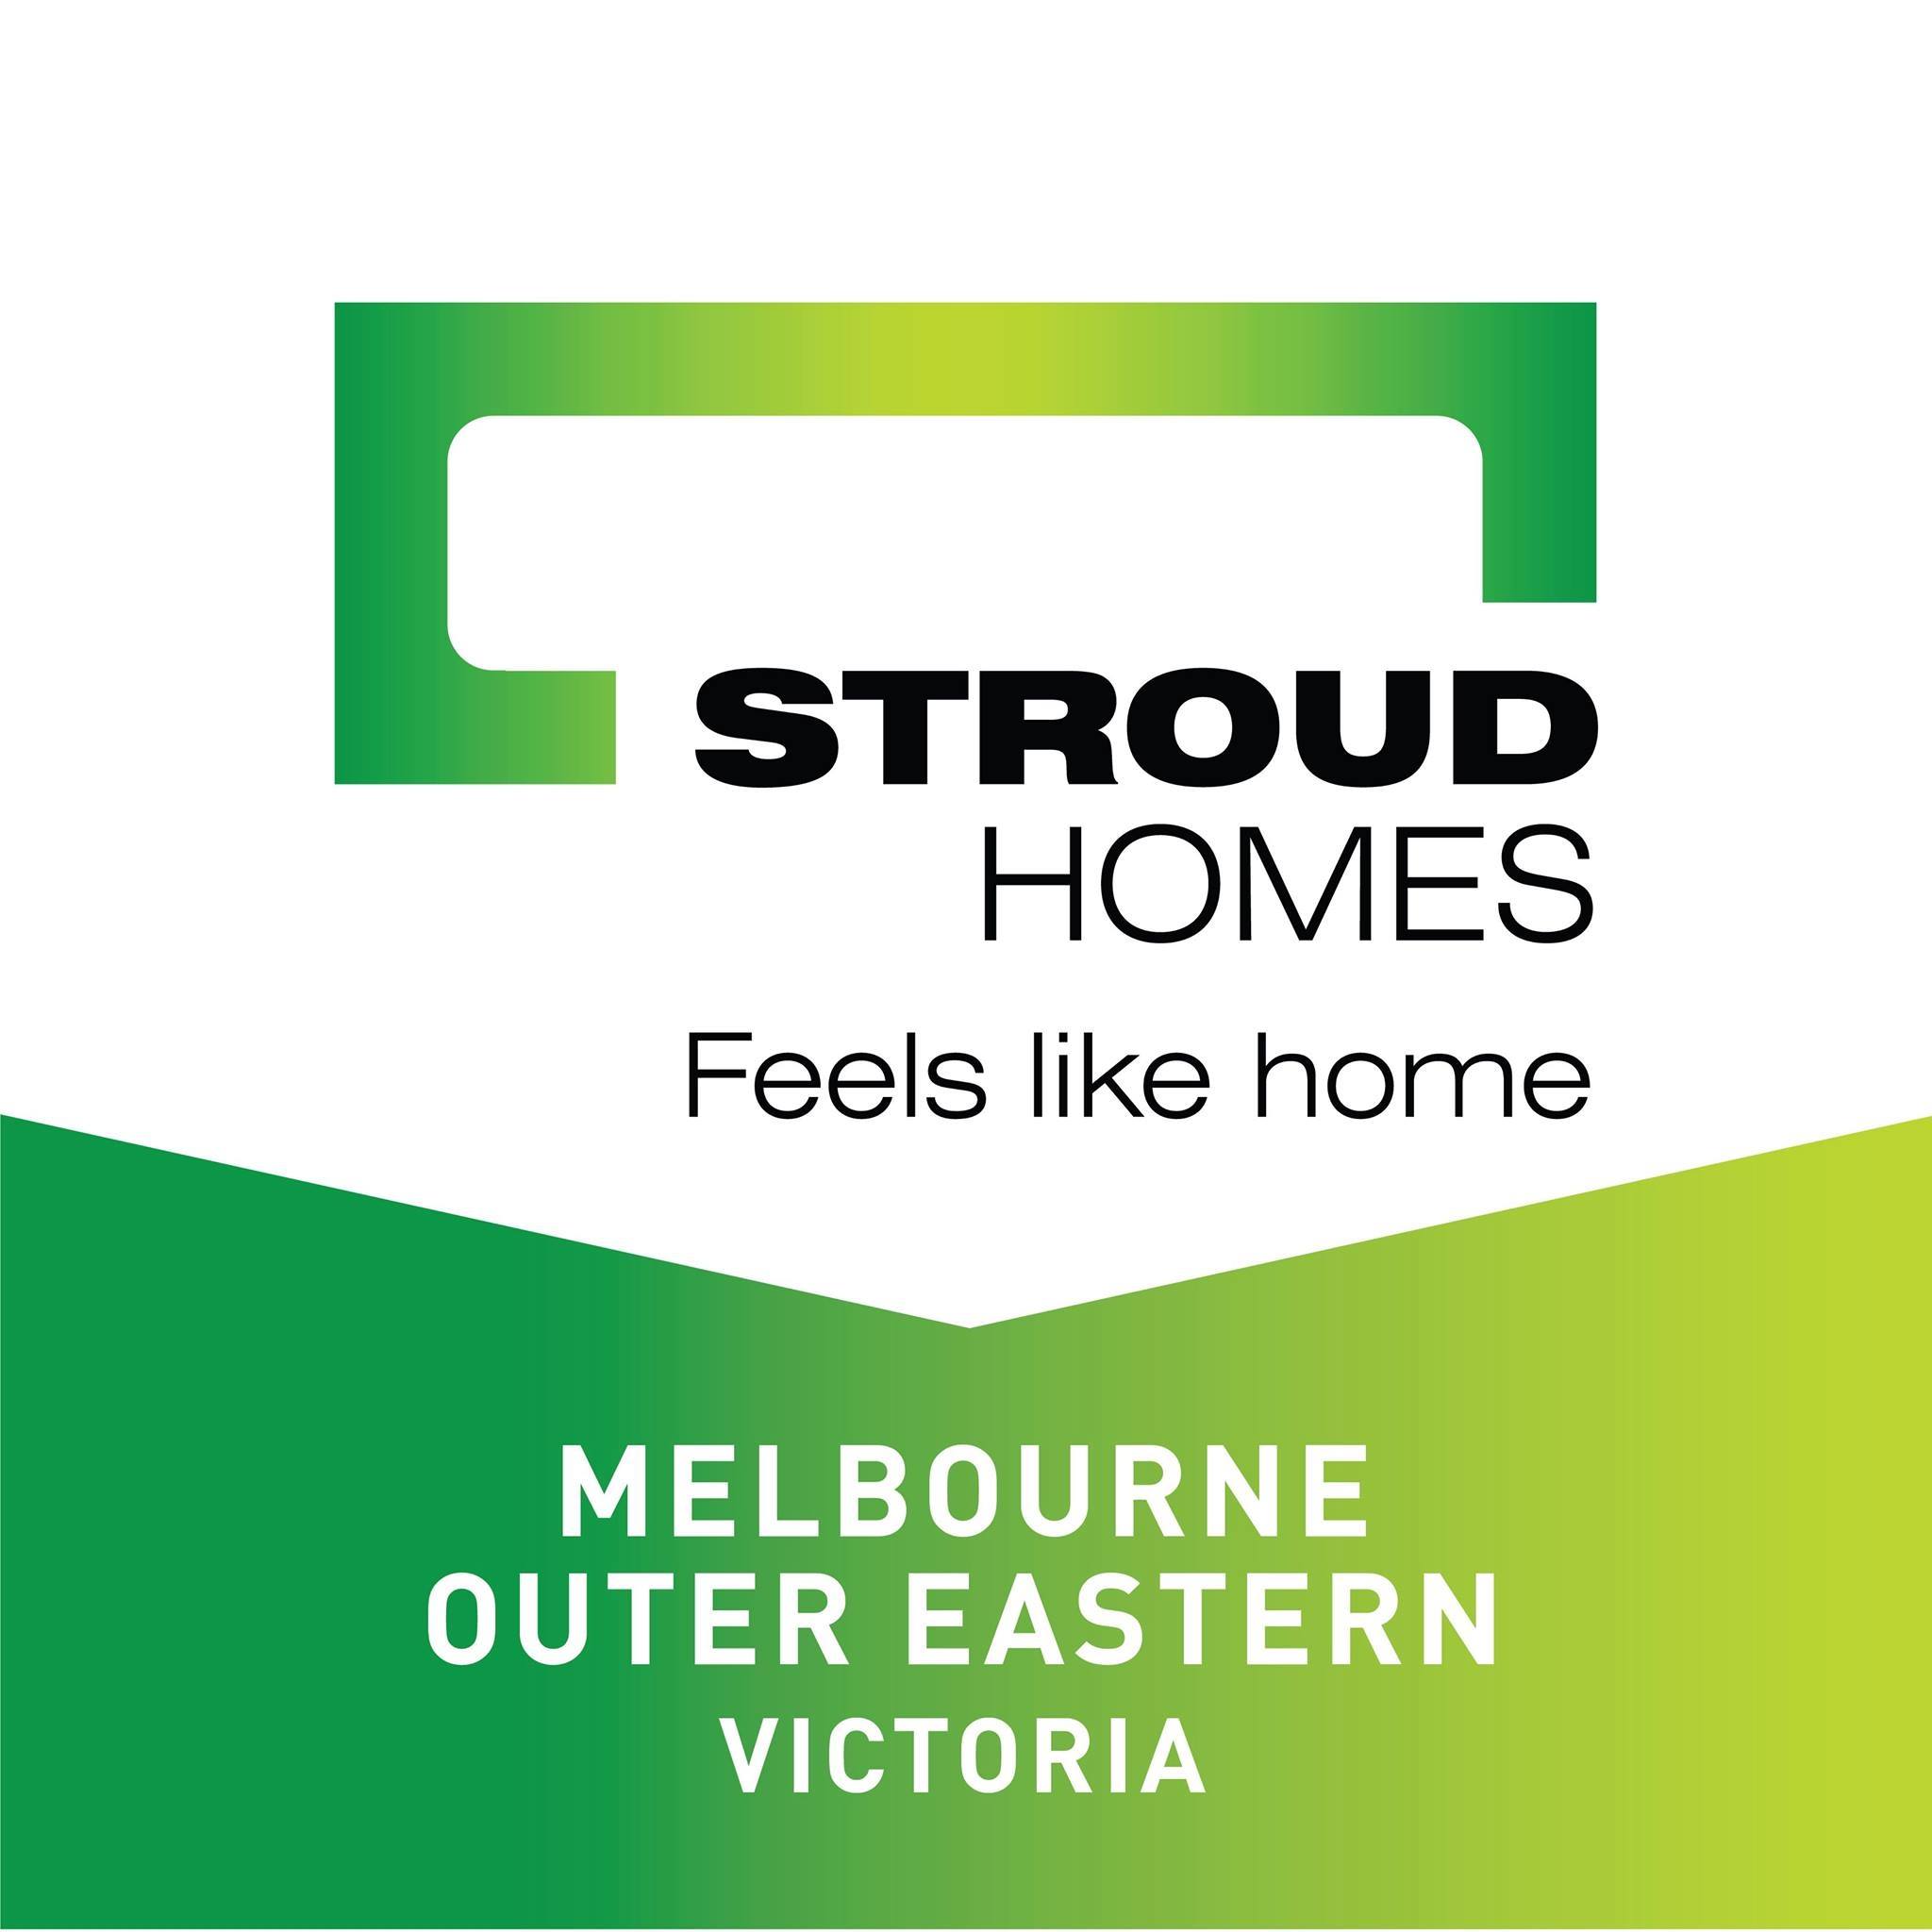 Stroud Homes Melbourne Outer Eastern | 325 Main St, Lilydale VIC 3140, Australia | Phone: 03 8609 8881